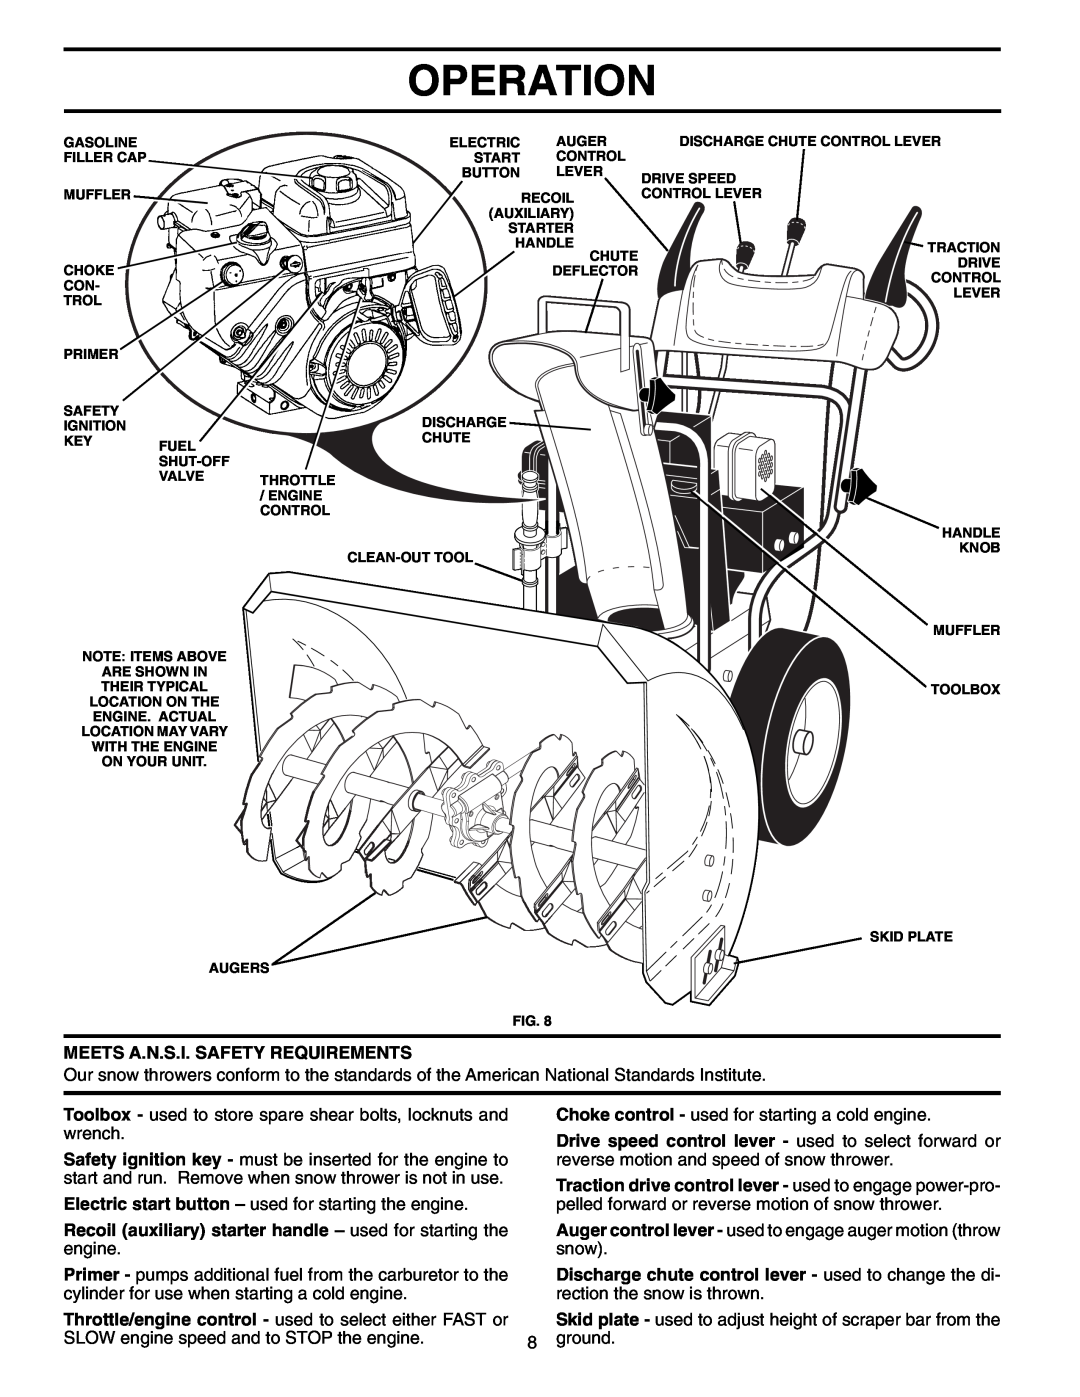 Husqvarna 5524SEB owner manual Operation, Meets A.N.S.I. Safety Requirements 